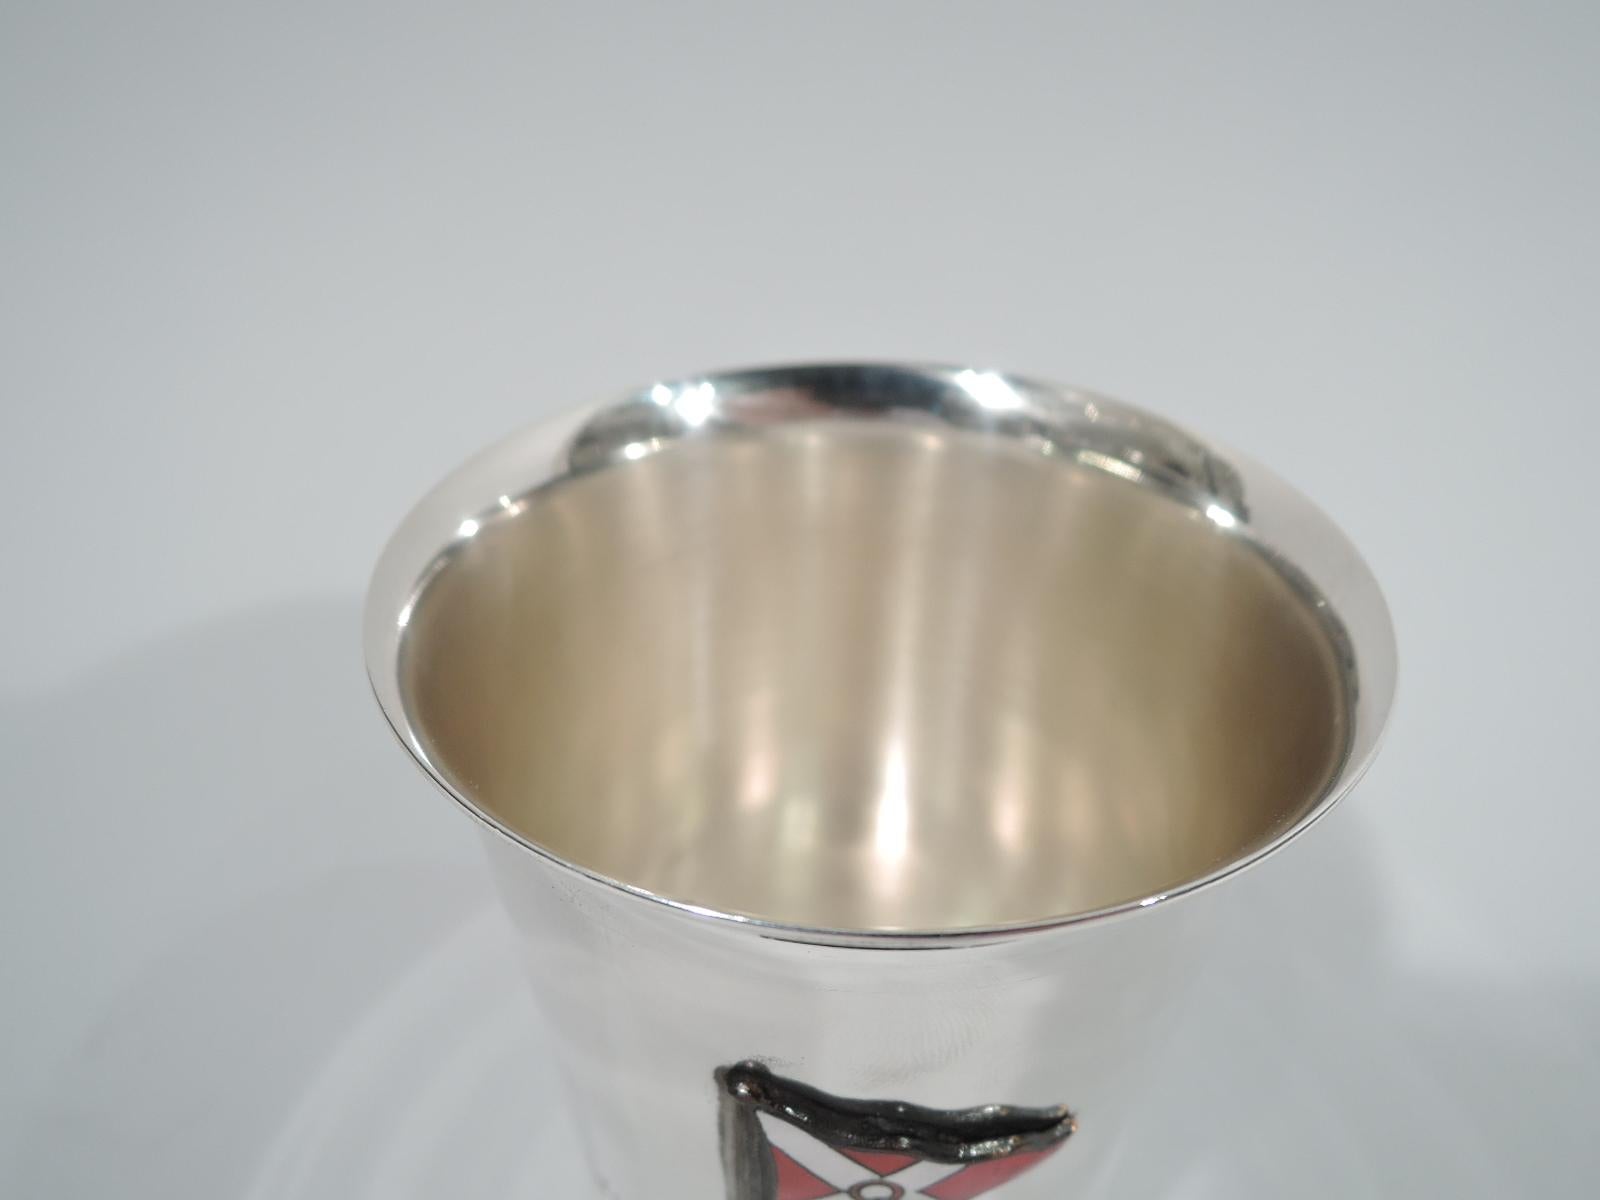 Mid-Century Modern sterling silver tumbler. Straight and tapering sides, and flared rim. On front is engraved “1957 / Wednesday July Series / Winner”. Above is applied red and white pennant with letter Q. Marked “John Frick / Jlry. Co. N.Y. /